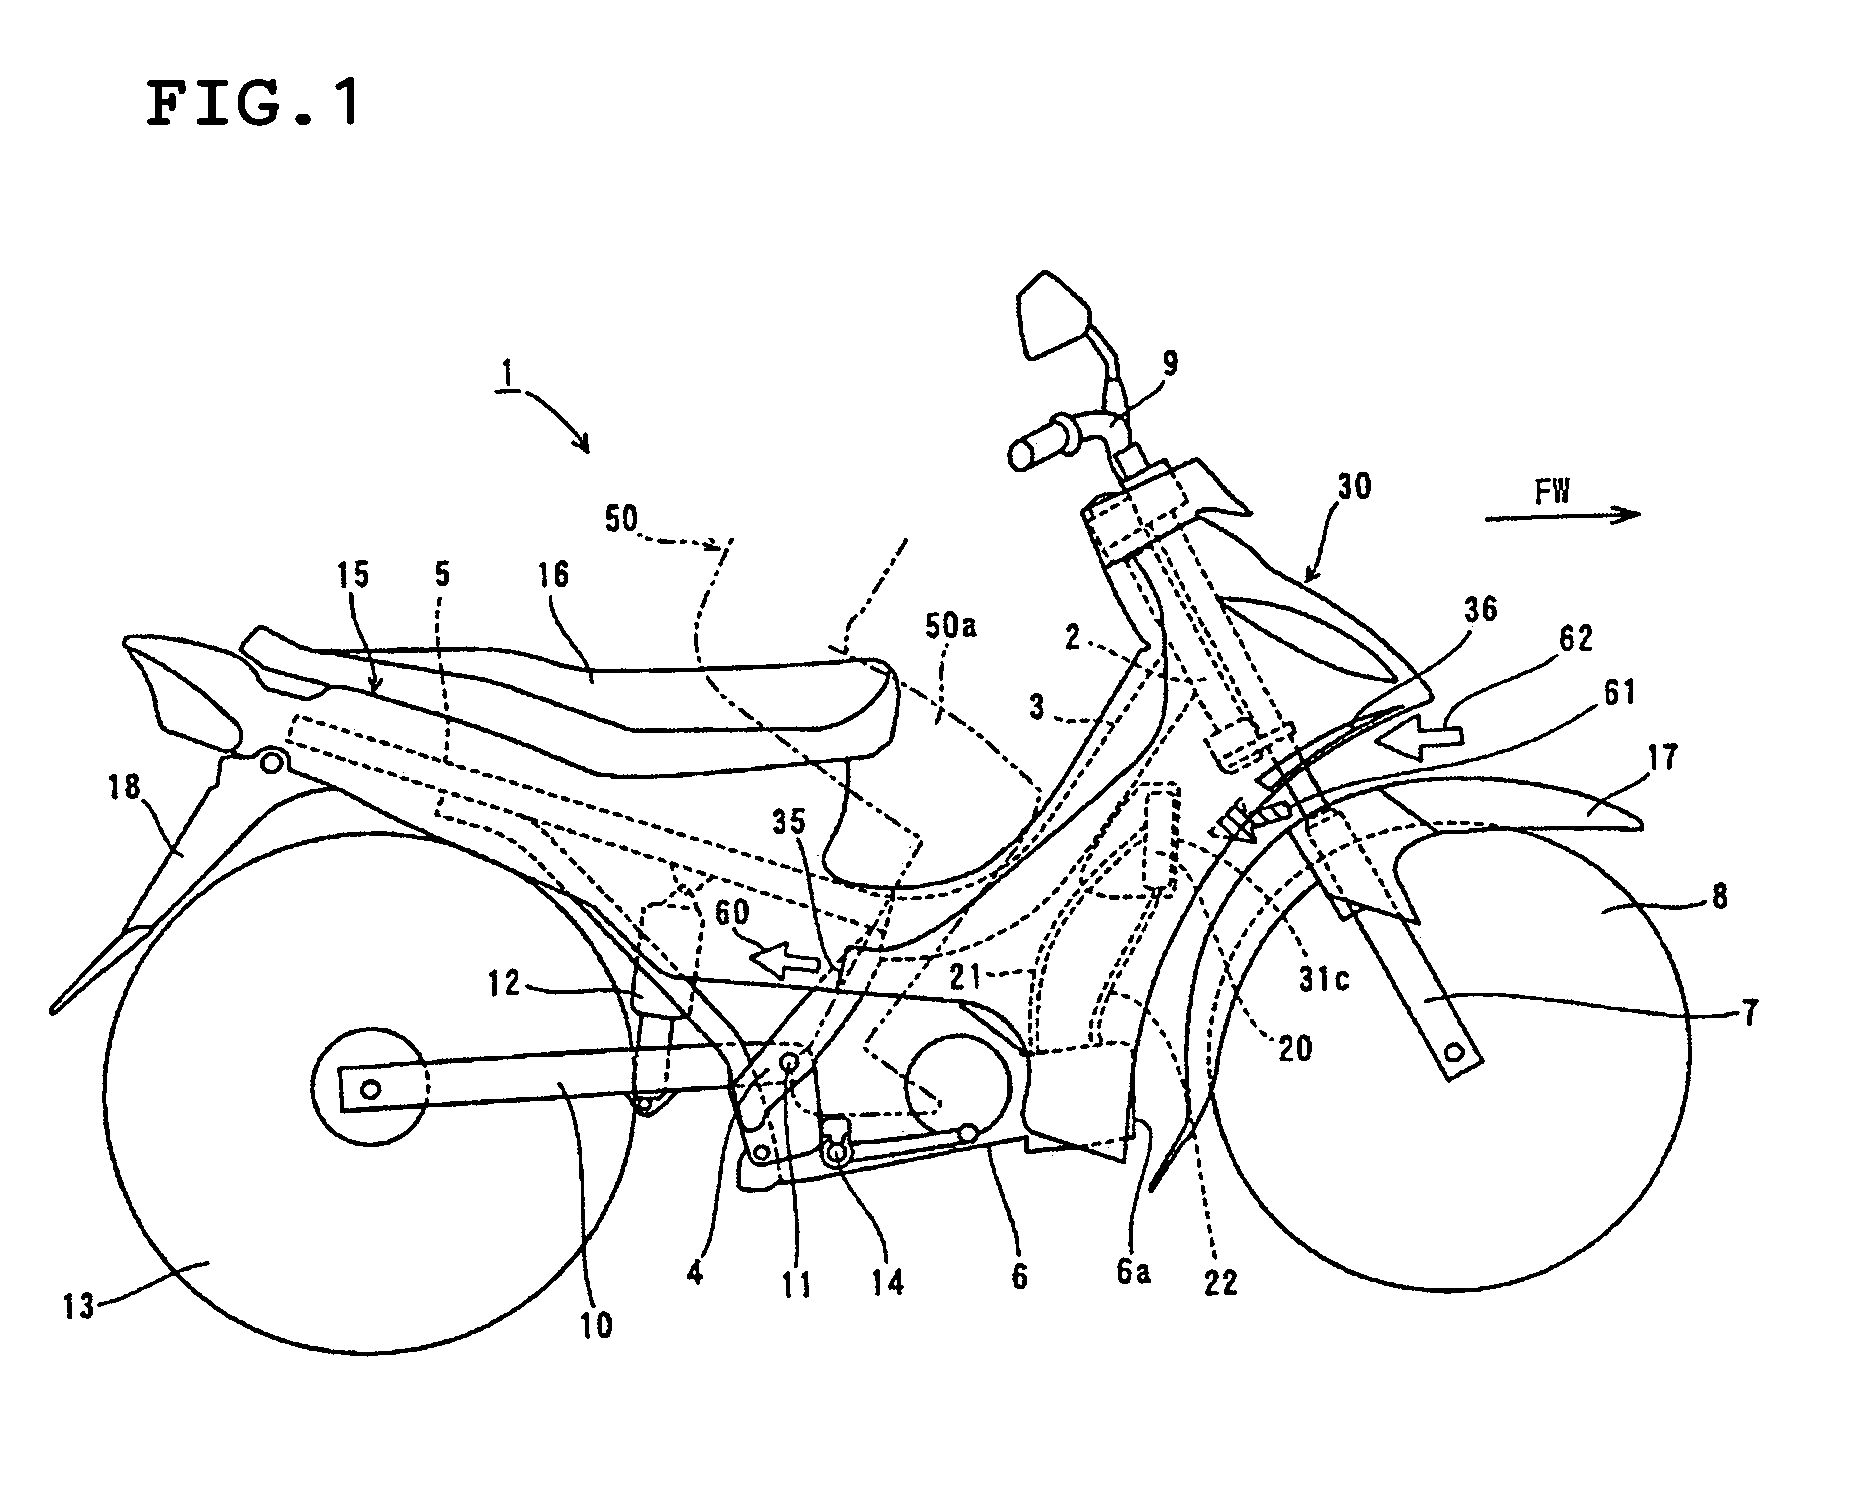 Air guide structure in motor vehicle leg shield